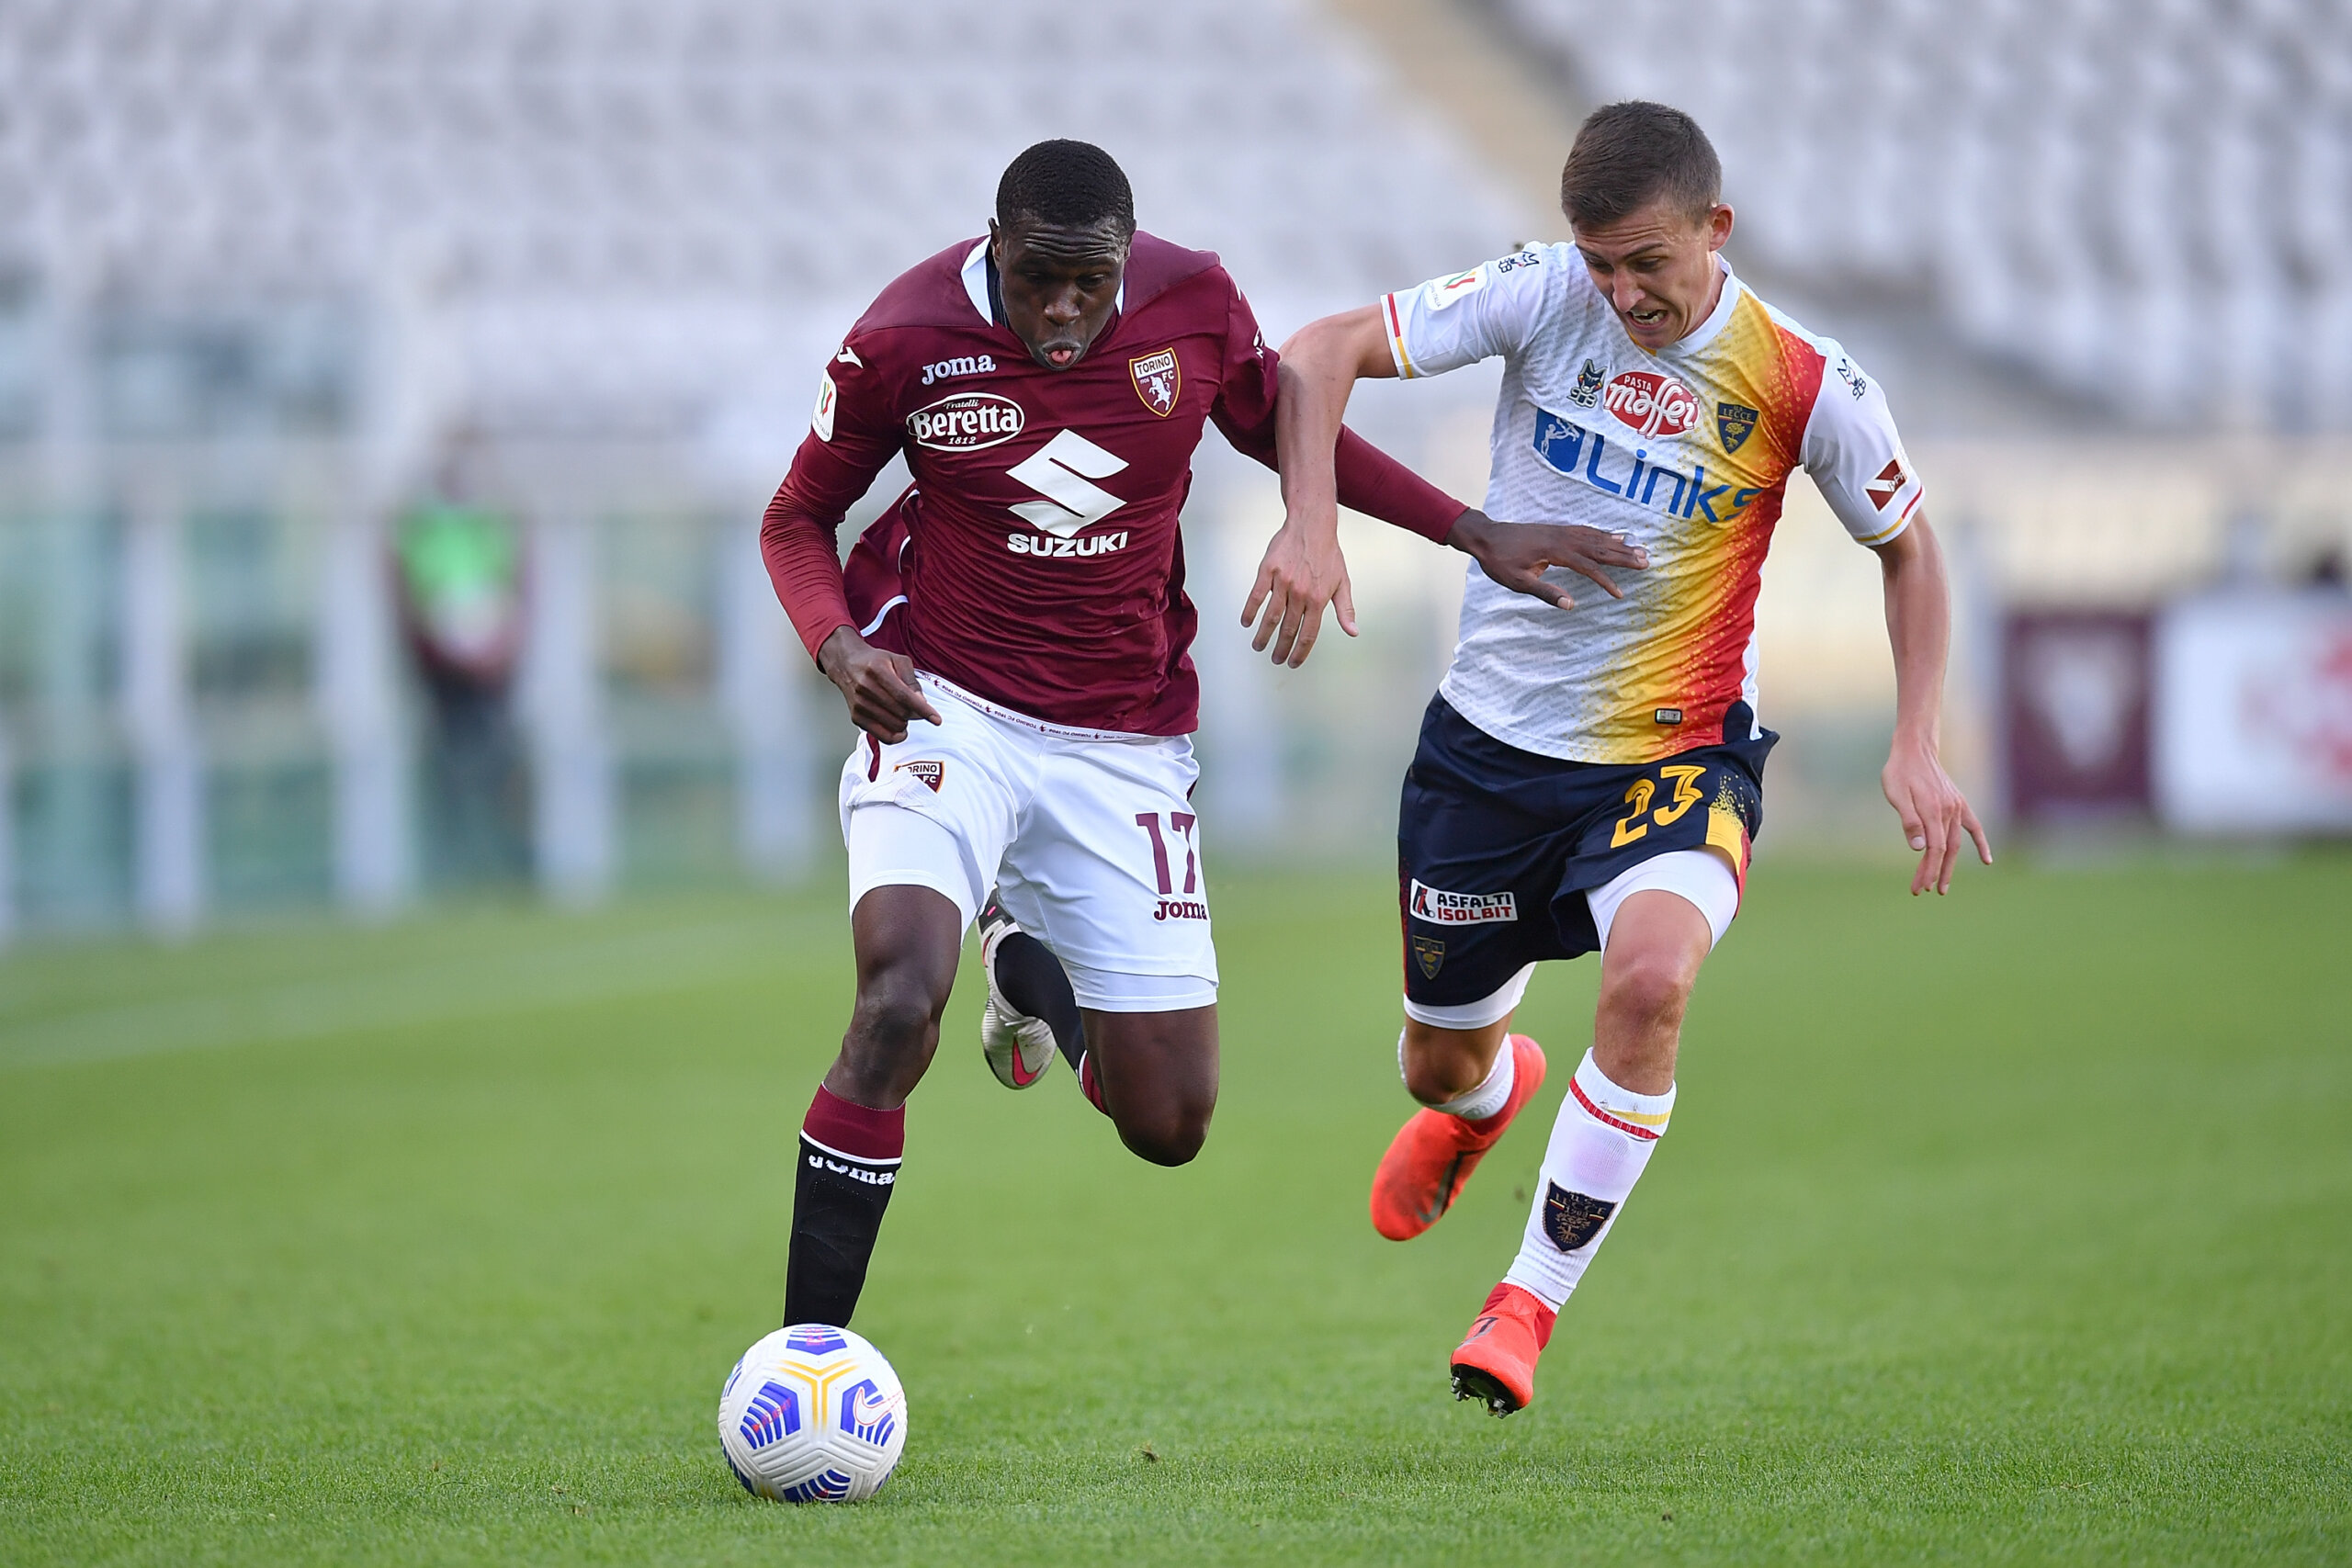 Wilfried Singo of Torino FC is challenged by John Gunnar Bjorkengren of US Lecce. (Photo by Valerio Pennicino/Getty Images)